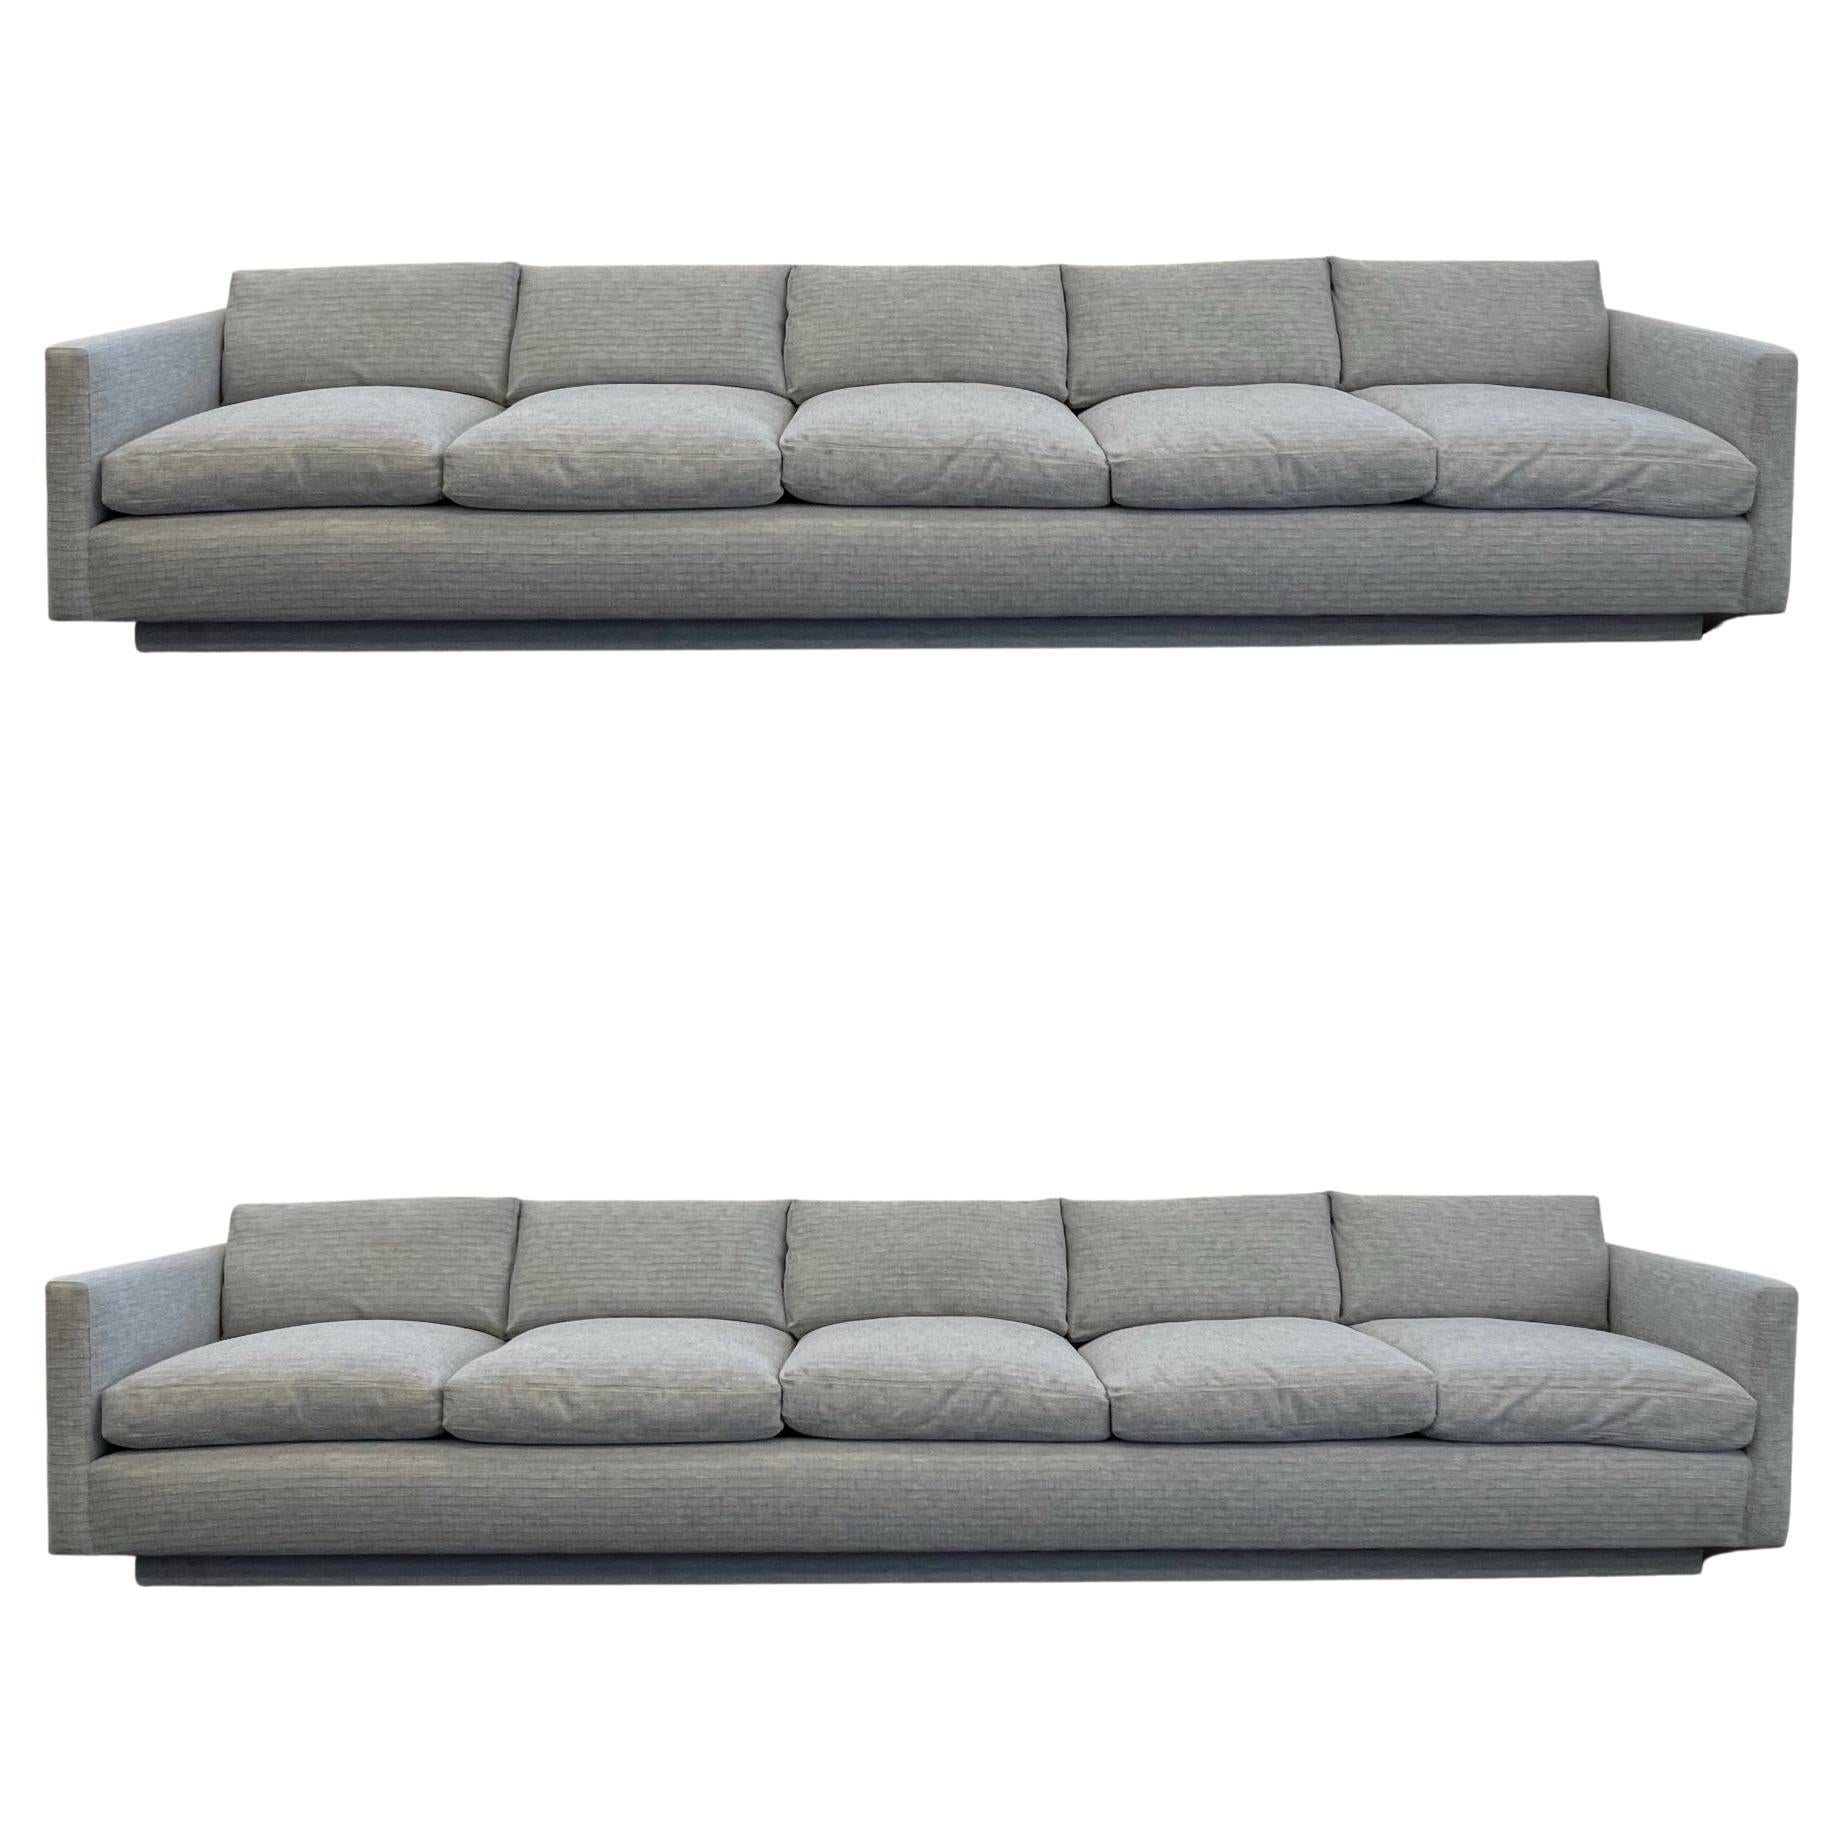 Pair of Long Lite Blue Down Filled Sofas by Steve Chase